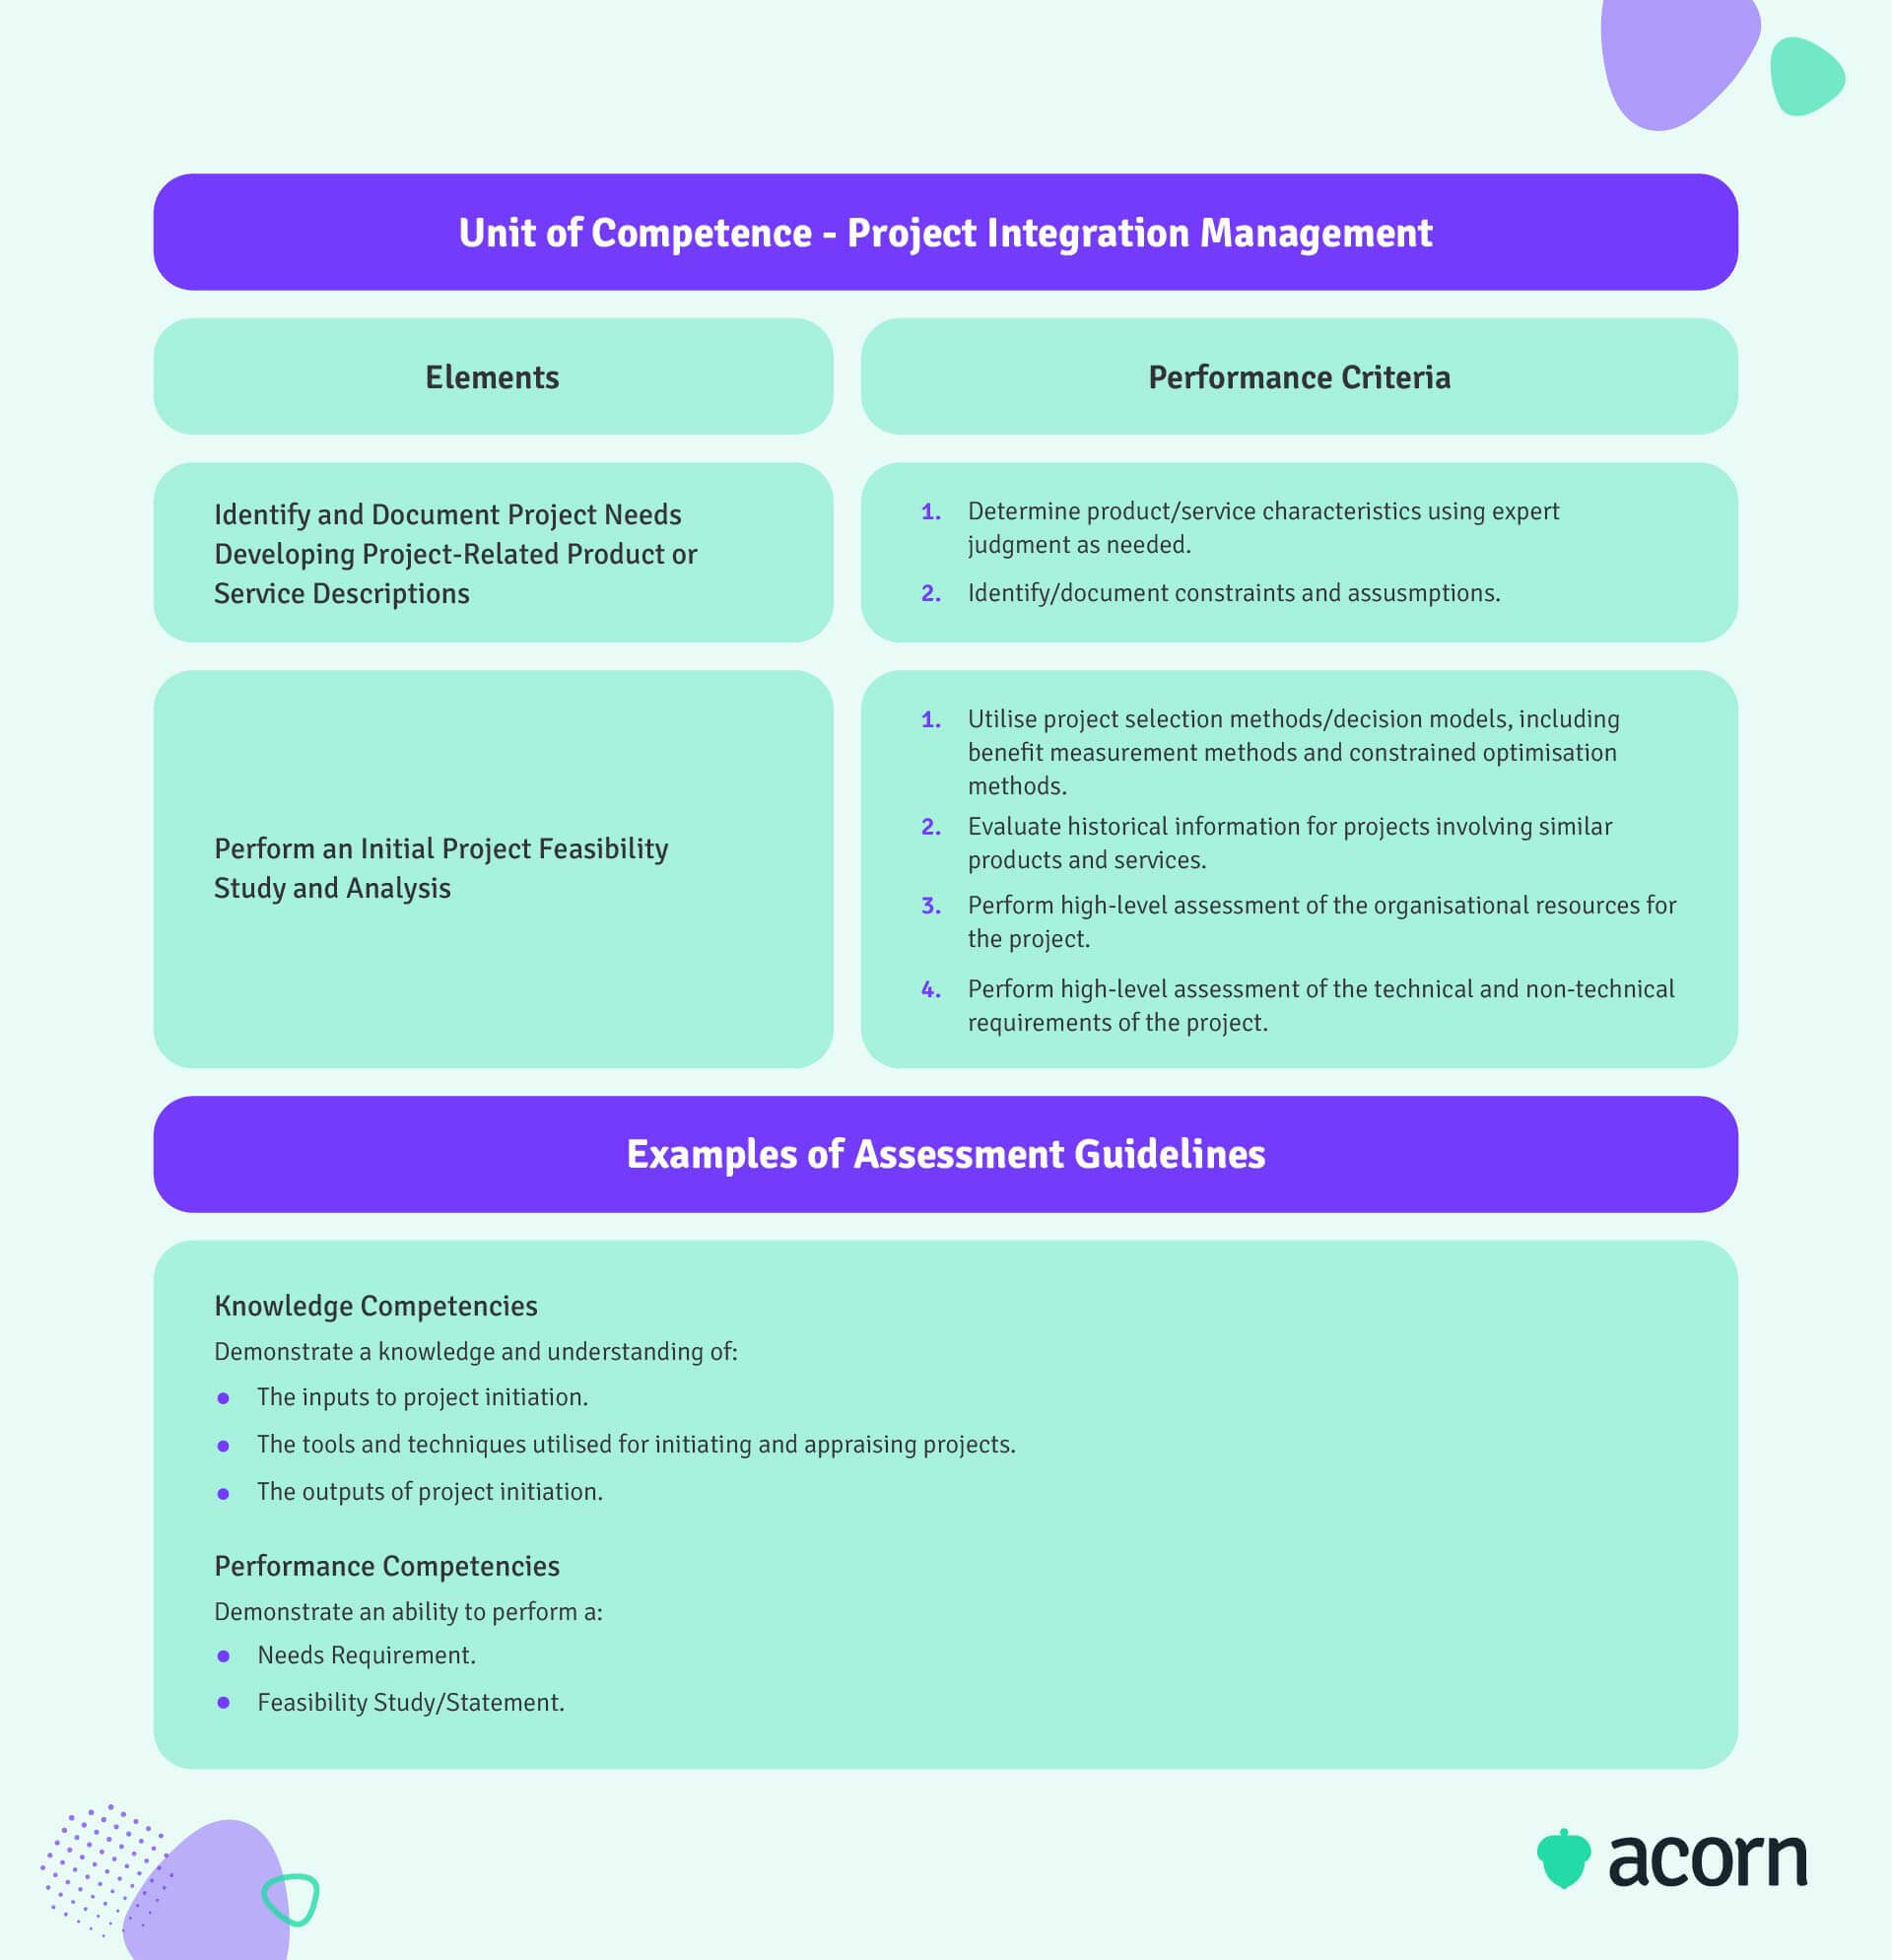 Infographic of PMI standard knowledge and performance competency example